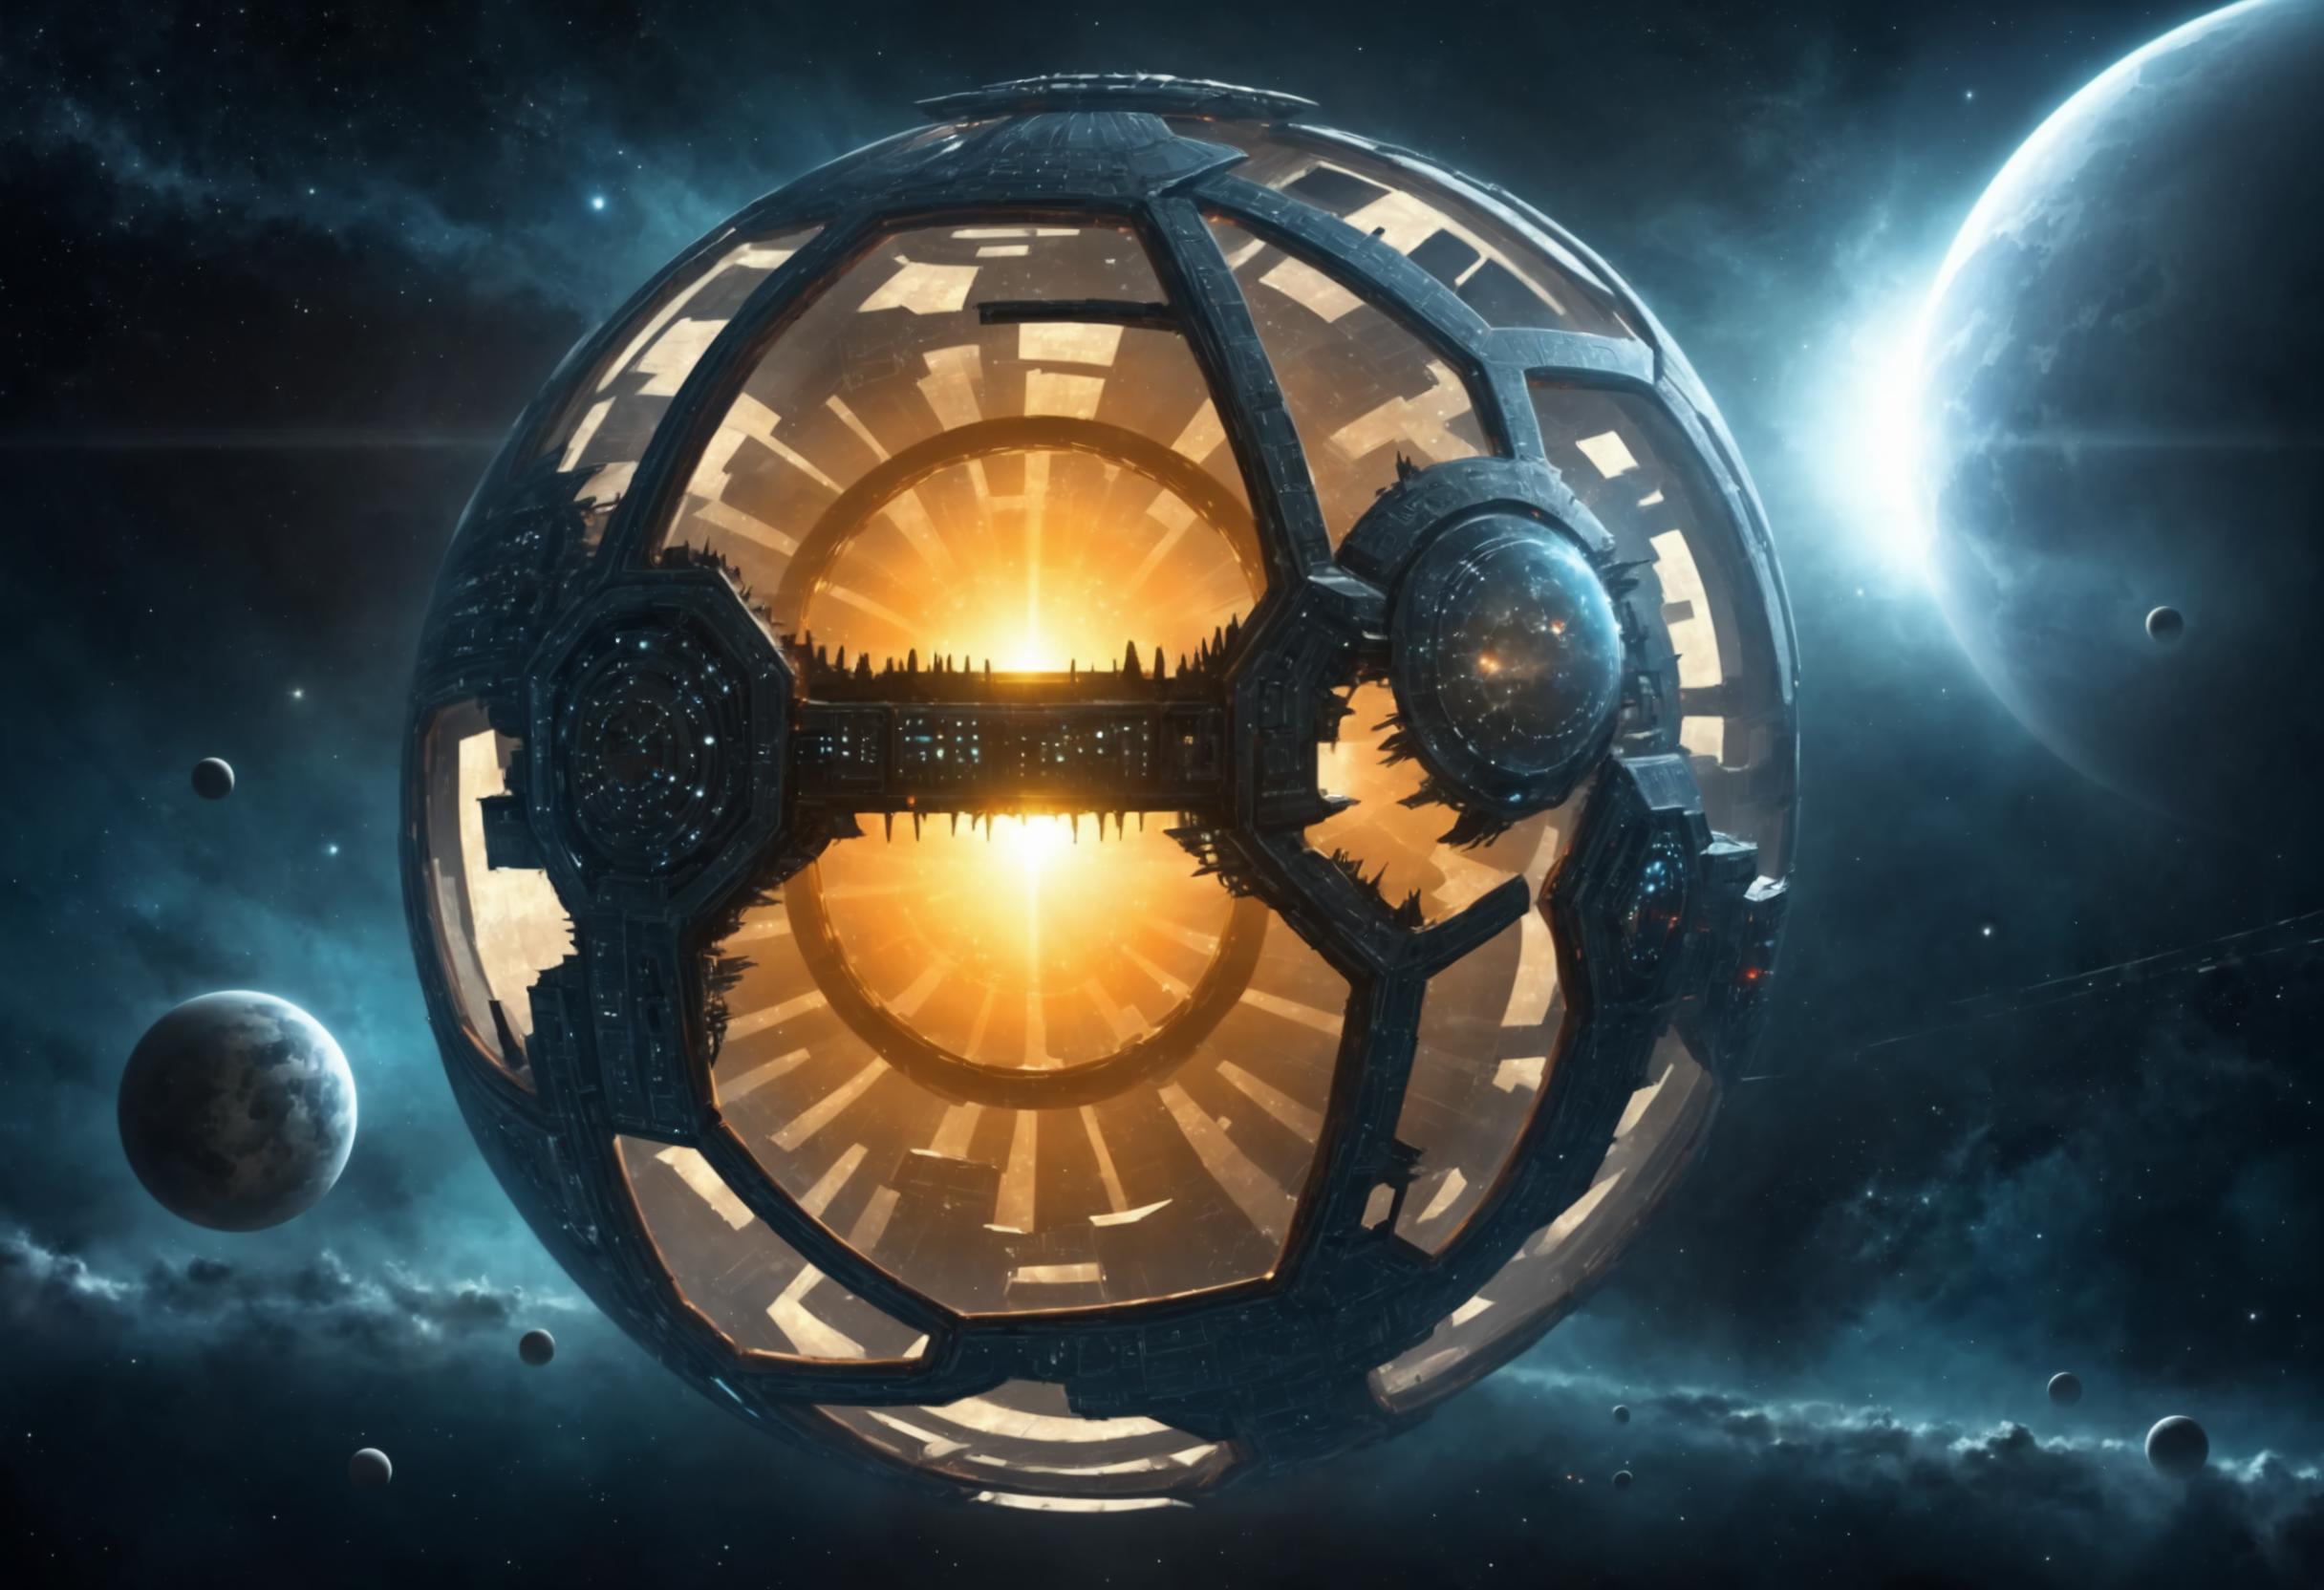 Dyson Sphere SDXL image by echo_cipher